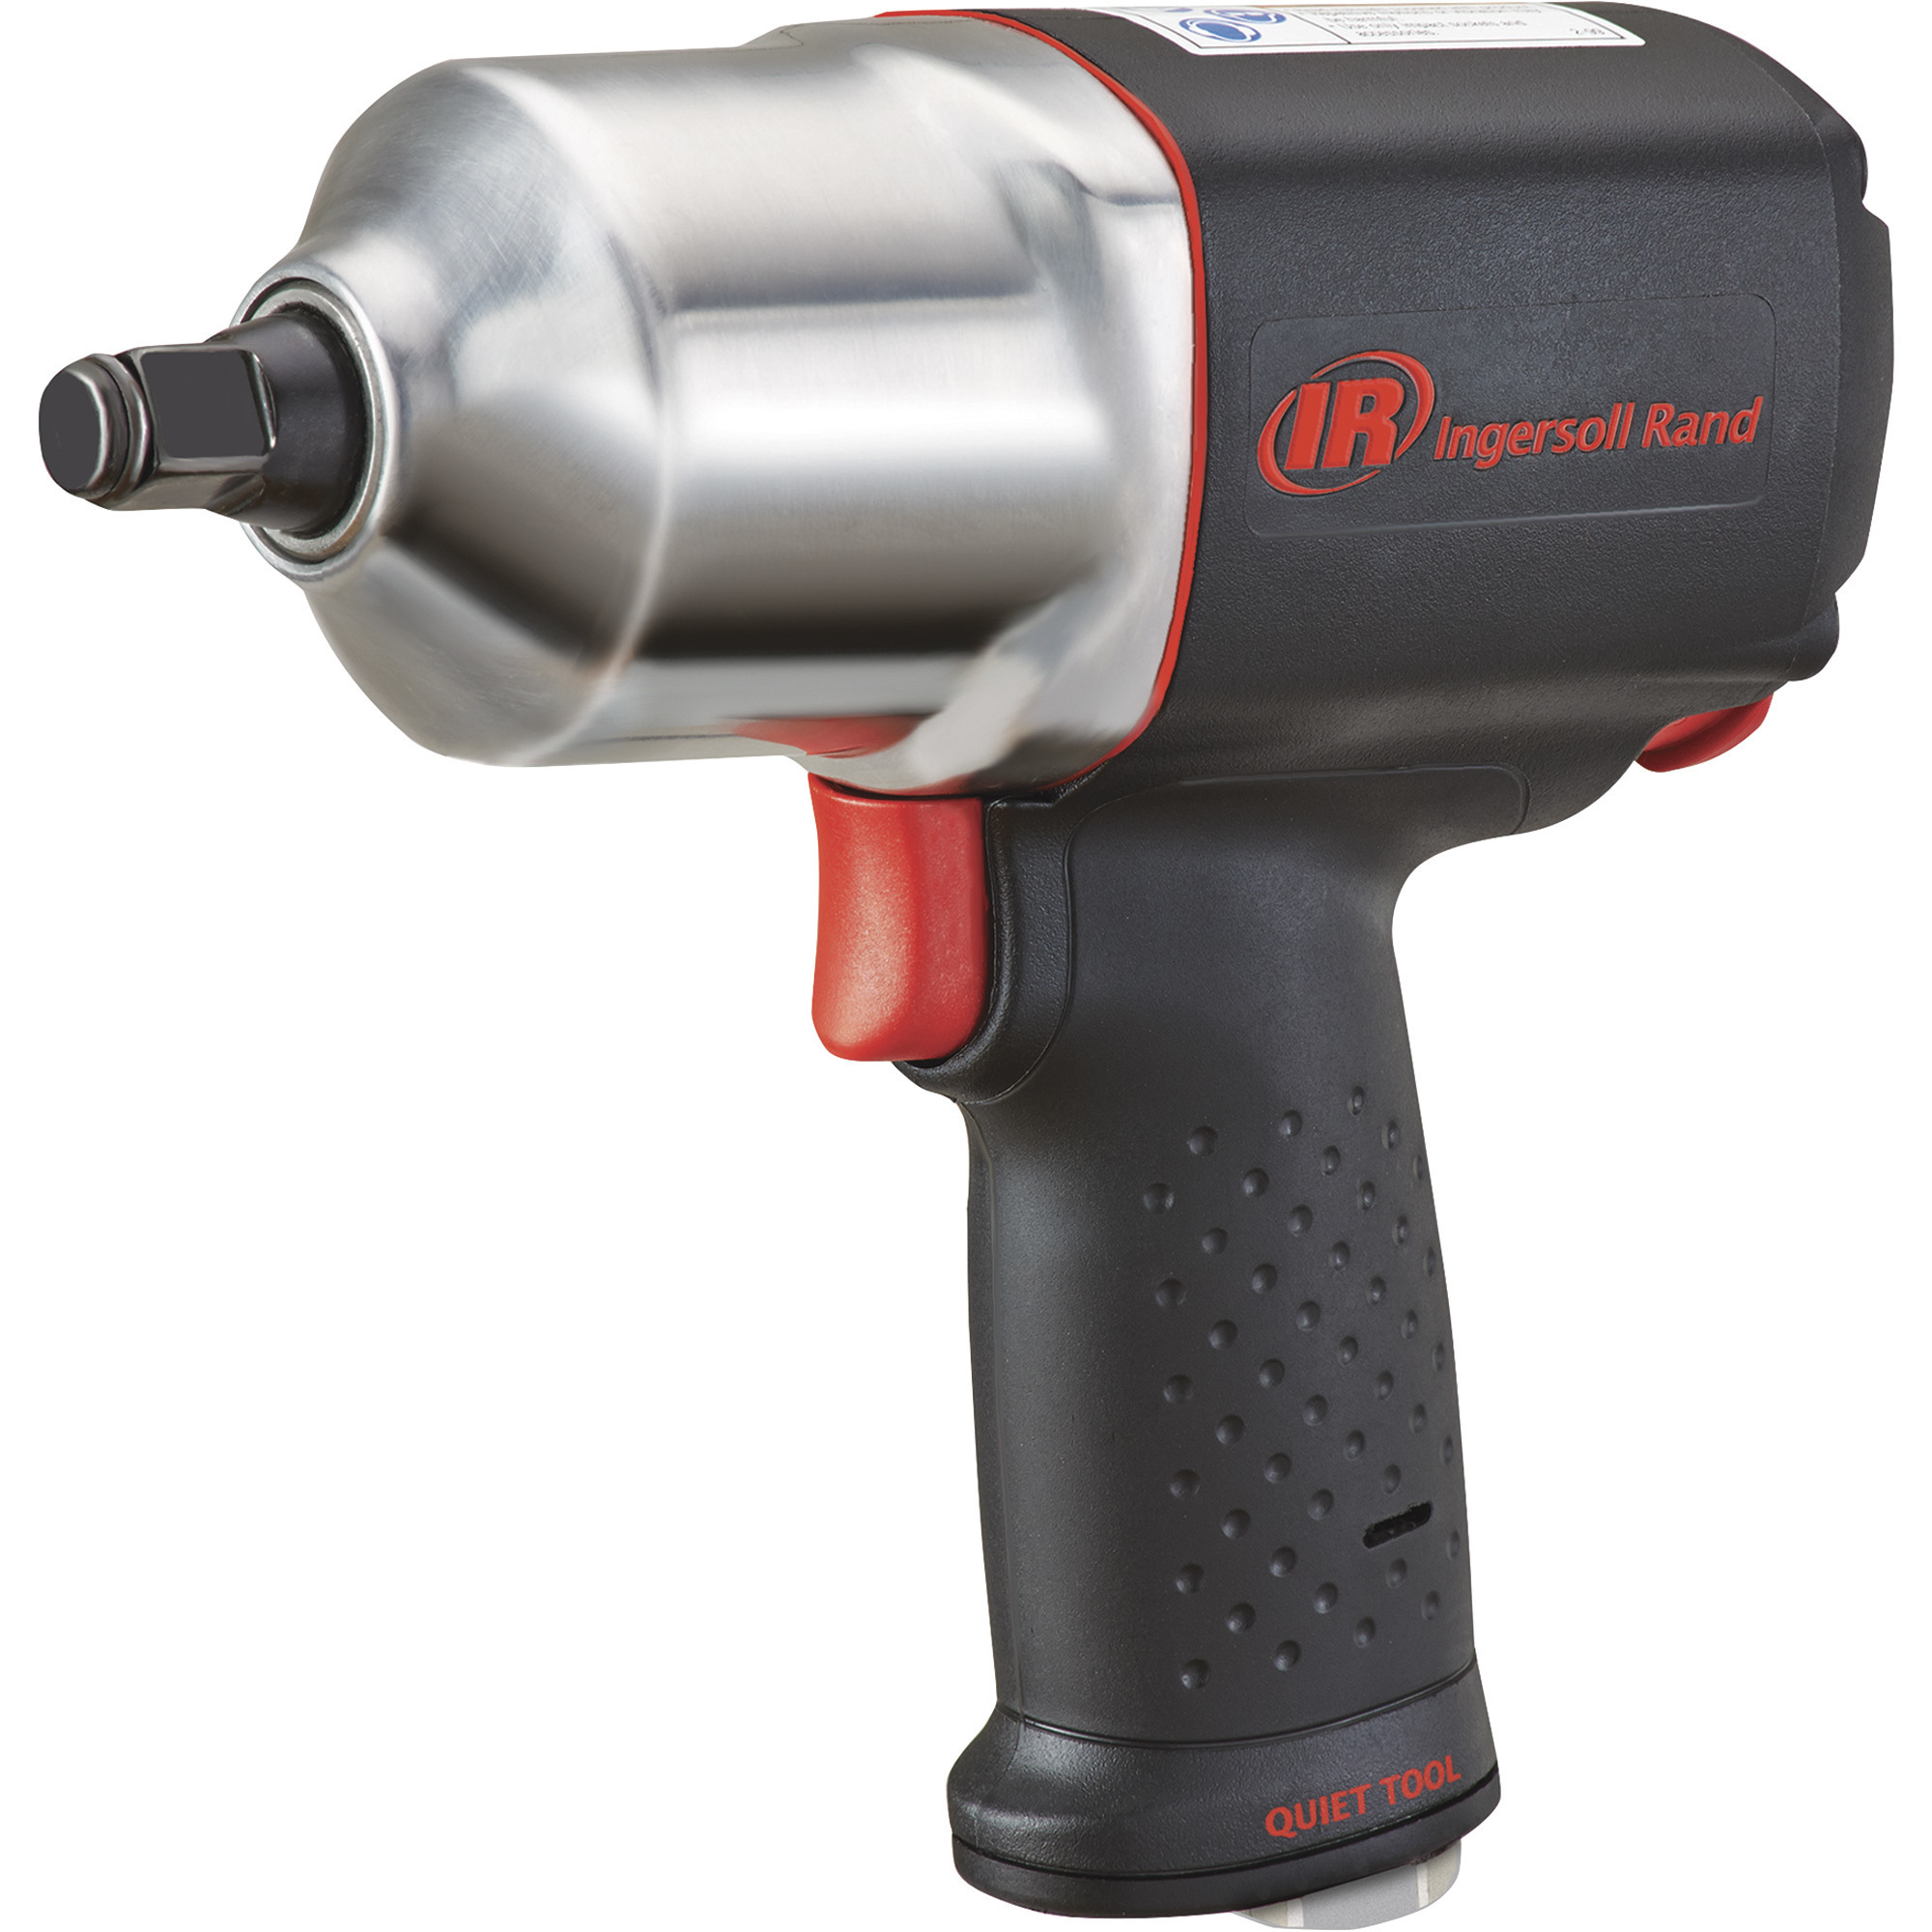 Ingersoll Rand Quiet Air Impact Wrench, 1/2Inch Drive, 5.8 CFM, 1100 Ft./Lbs. Torque, Model 2135QXPA